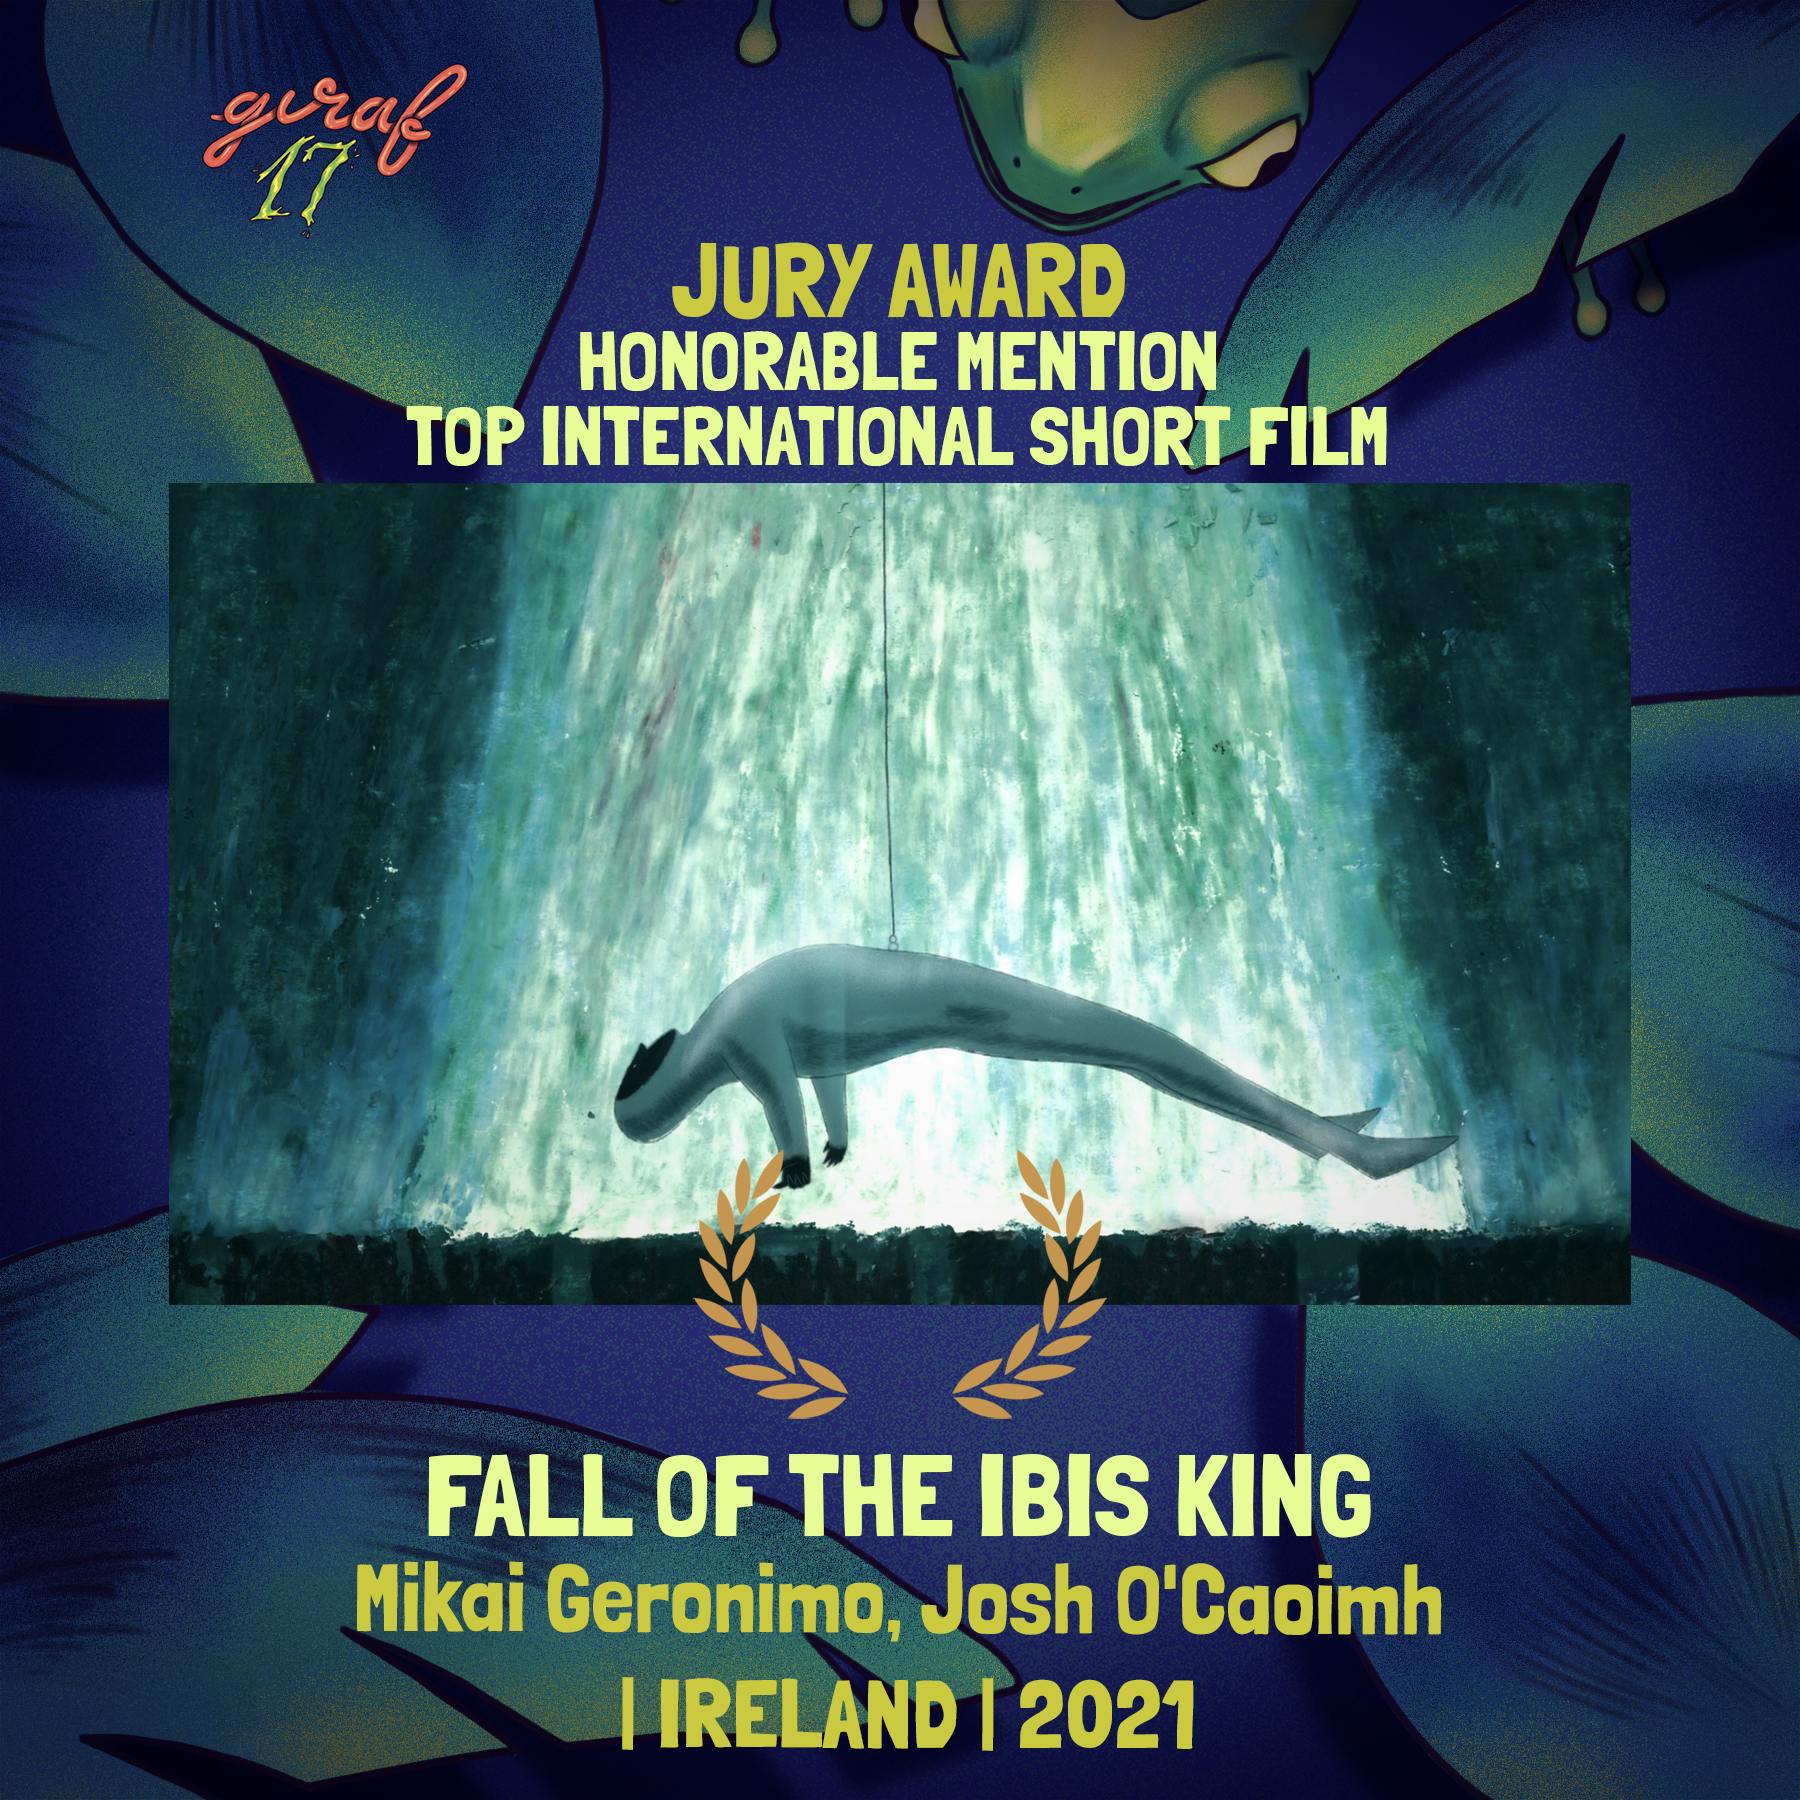 A figure in leotards hangs from the end of a cable. Text around it reads GIRAF 17 Jury Award, Honorable Mention – Top International Short Film; Fall of the Ibis King; Mikai Geronimo, Josh O'Caoimh; Ireland; 2021